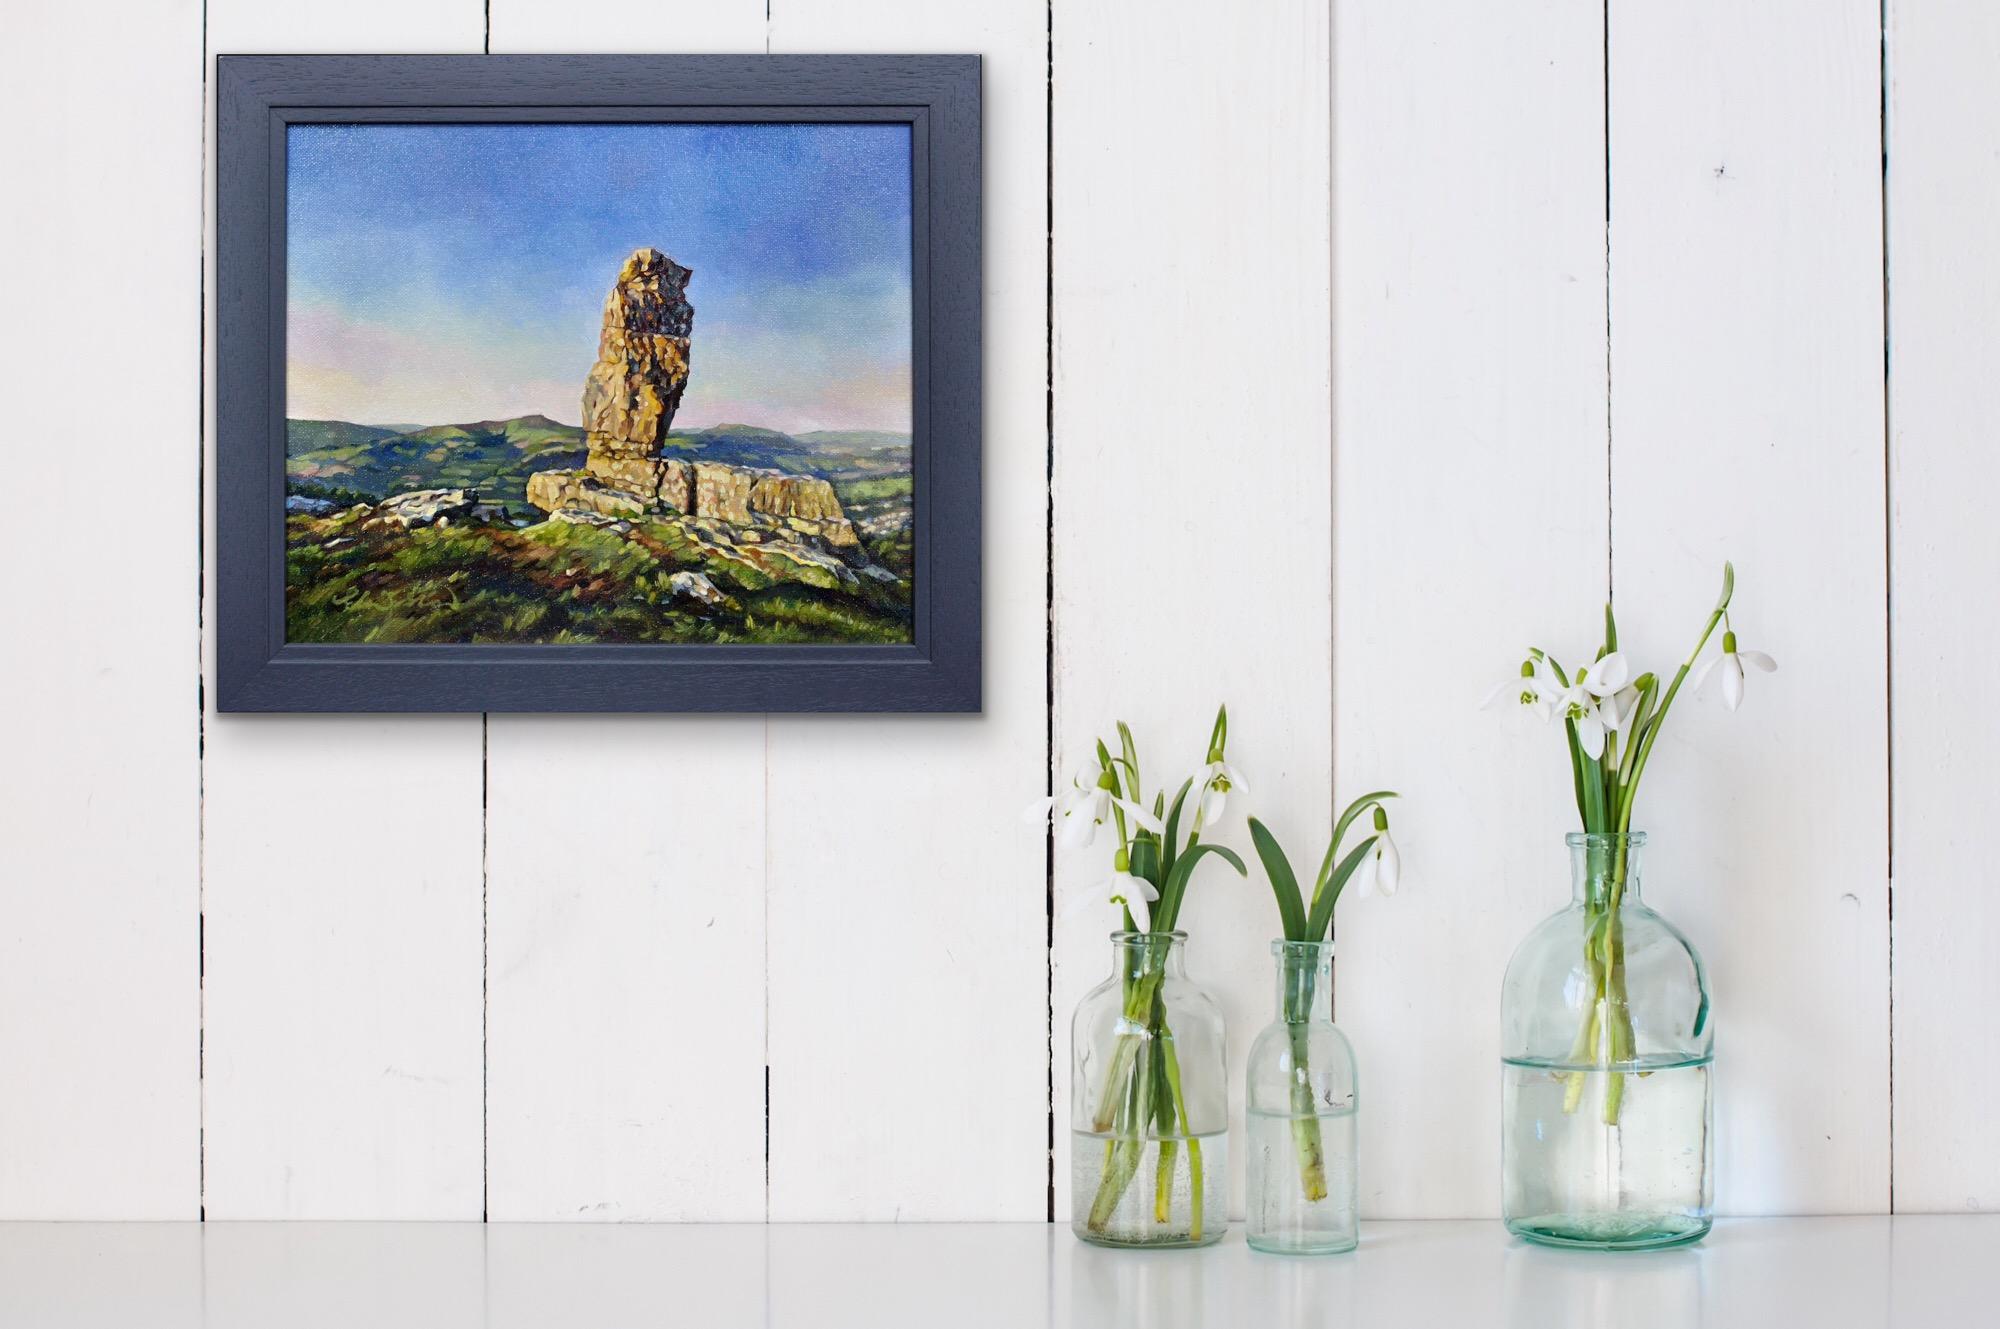 Y Bugail Unig (The Lonely Shepherd), Llangattock, Brecon Beacons. Welsh Folklore For Sale 13